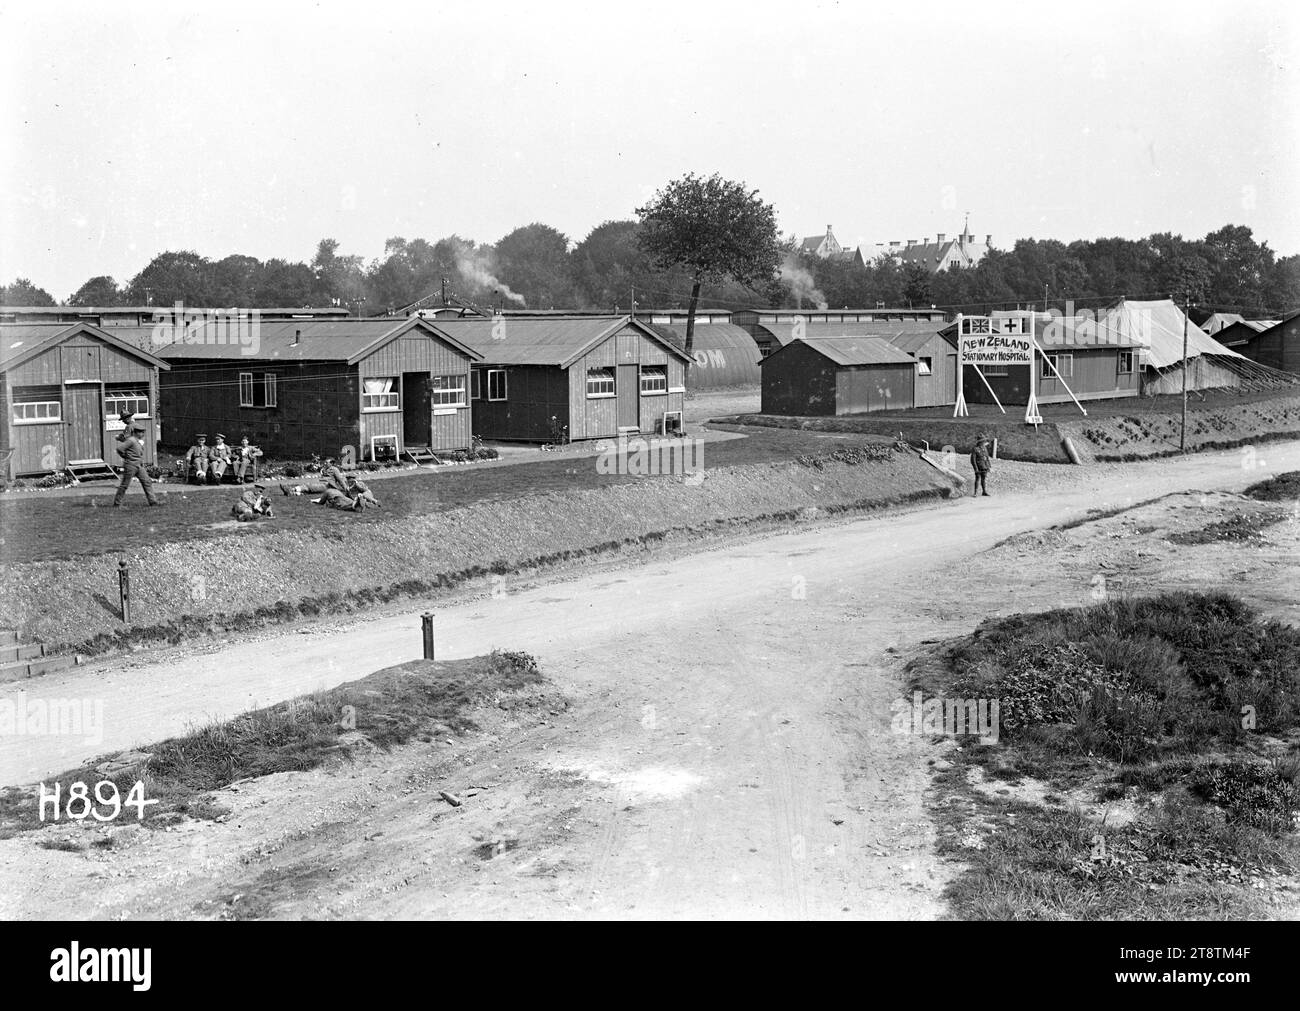 The New Zealand Stationary Hospital, Wisques, France, A general view of the New Zealand Stationary Hospital in Wisques during World War I. Shows a number of buildings, huts and a few tents. A large sign on the right includes a Union Jack and a Red Cross. Photograph taken 17 August 1918 Stock Photo